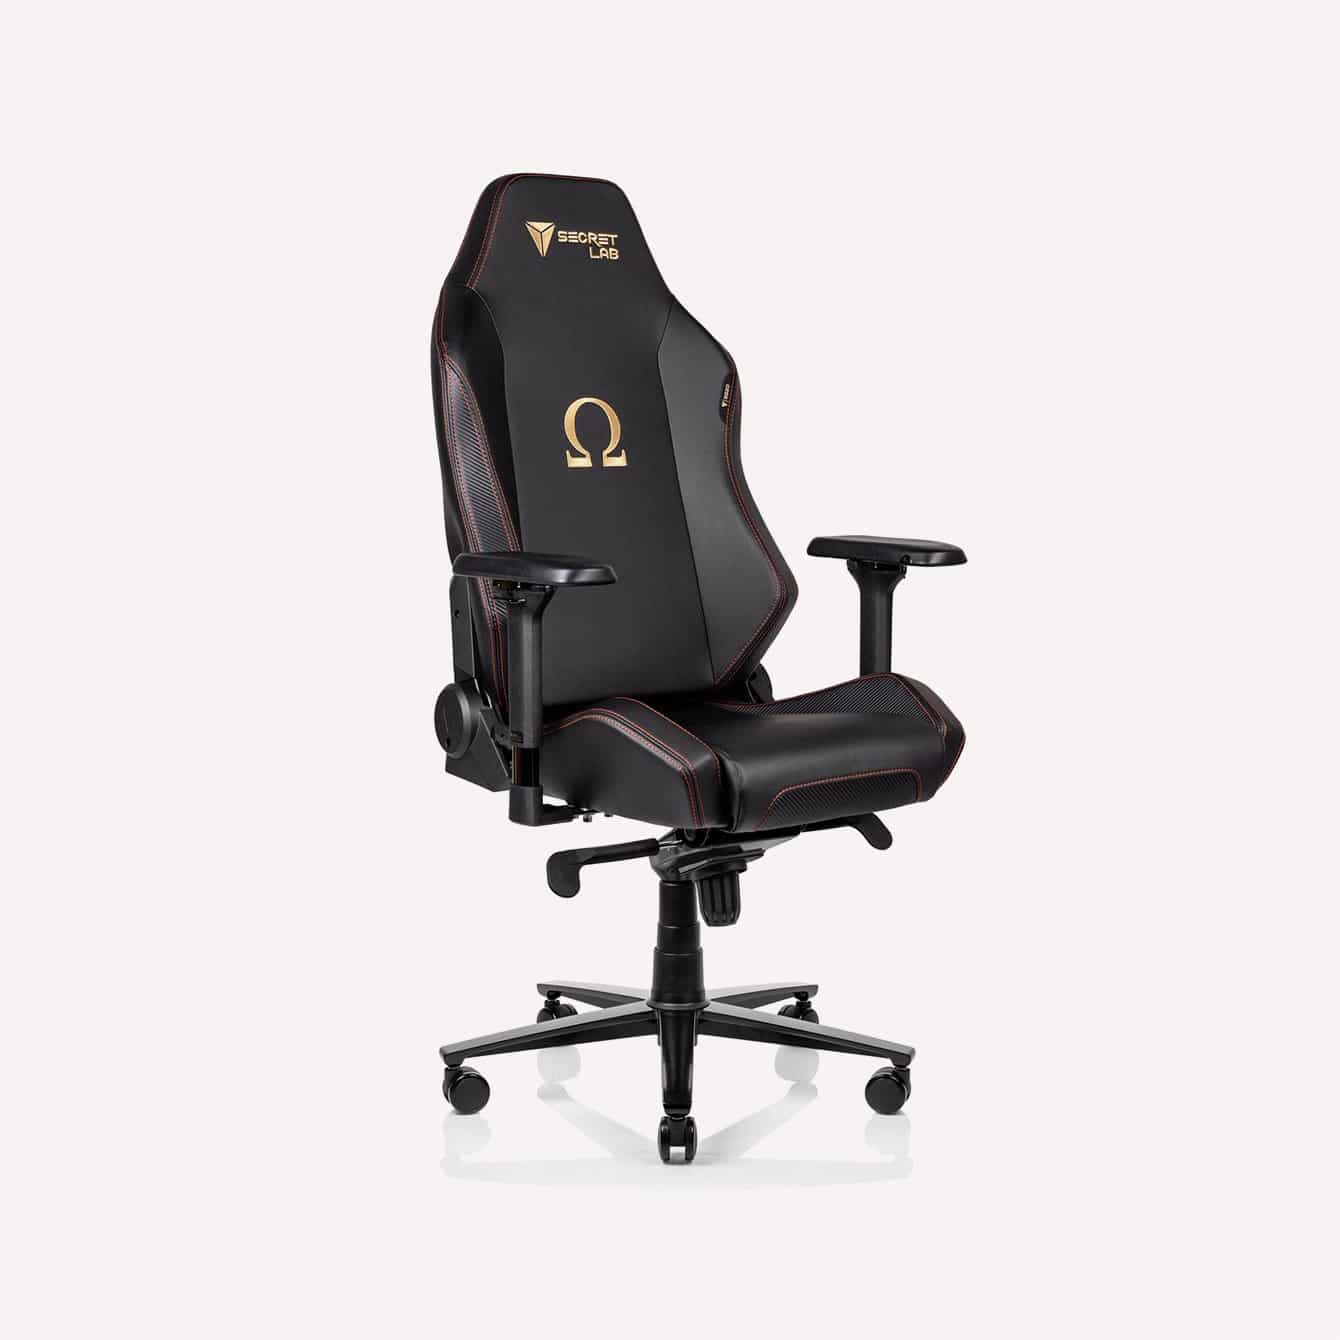 https://www.themodestman.com/wp-content/uploads/2021/06/Omega-Series-Prime-2.0-Gaming-Chair-Leather-Stealth.jpg